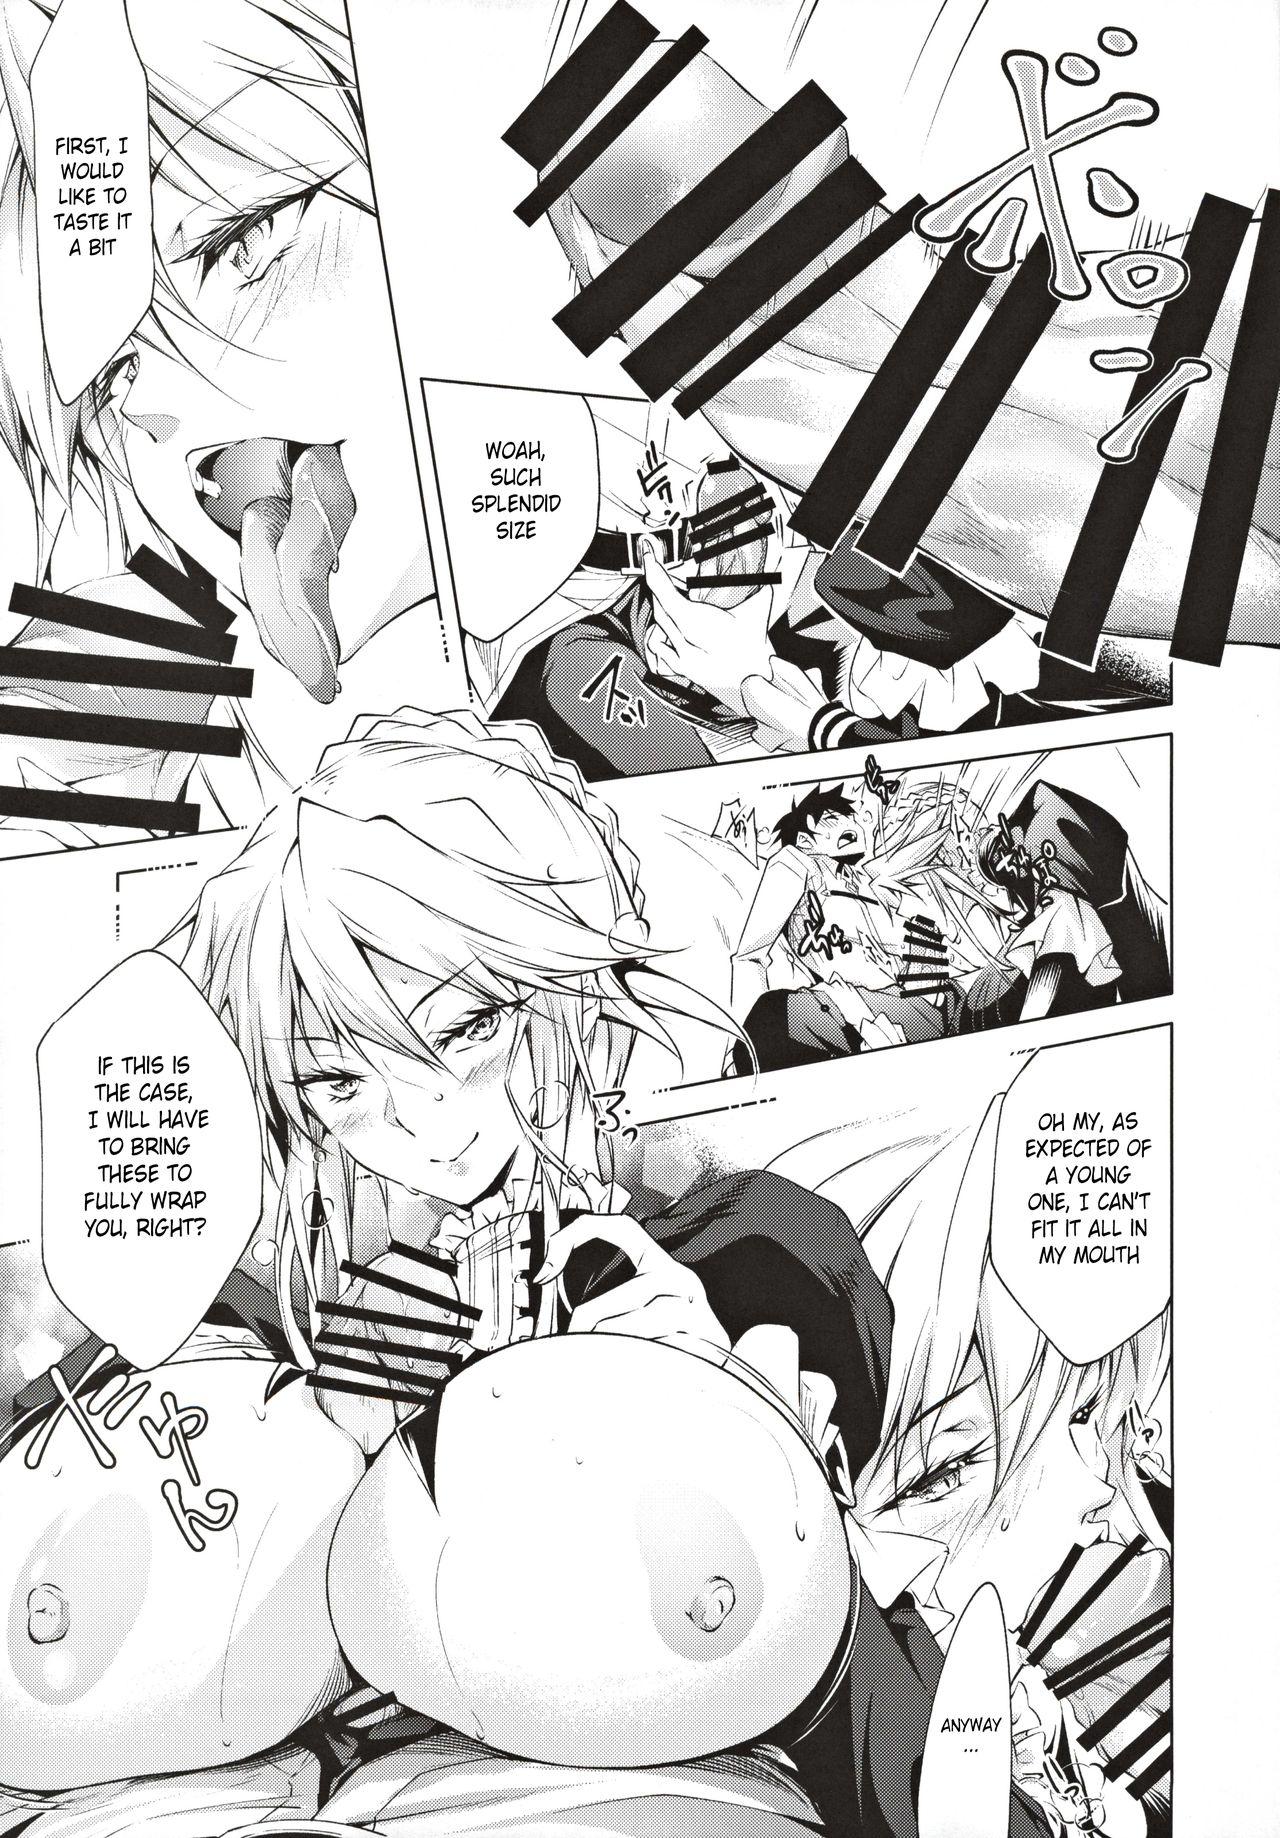 Wet Pendra Shimai no Seijijou | The Pendragon twin sisters' sexual situation - Fate grand order Model - Page 8